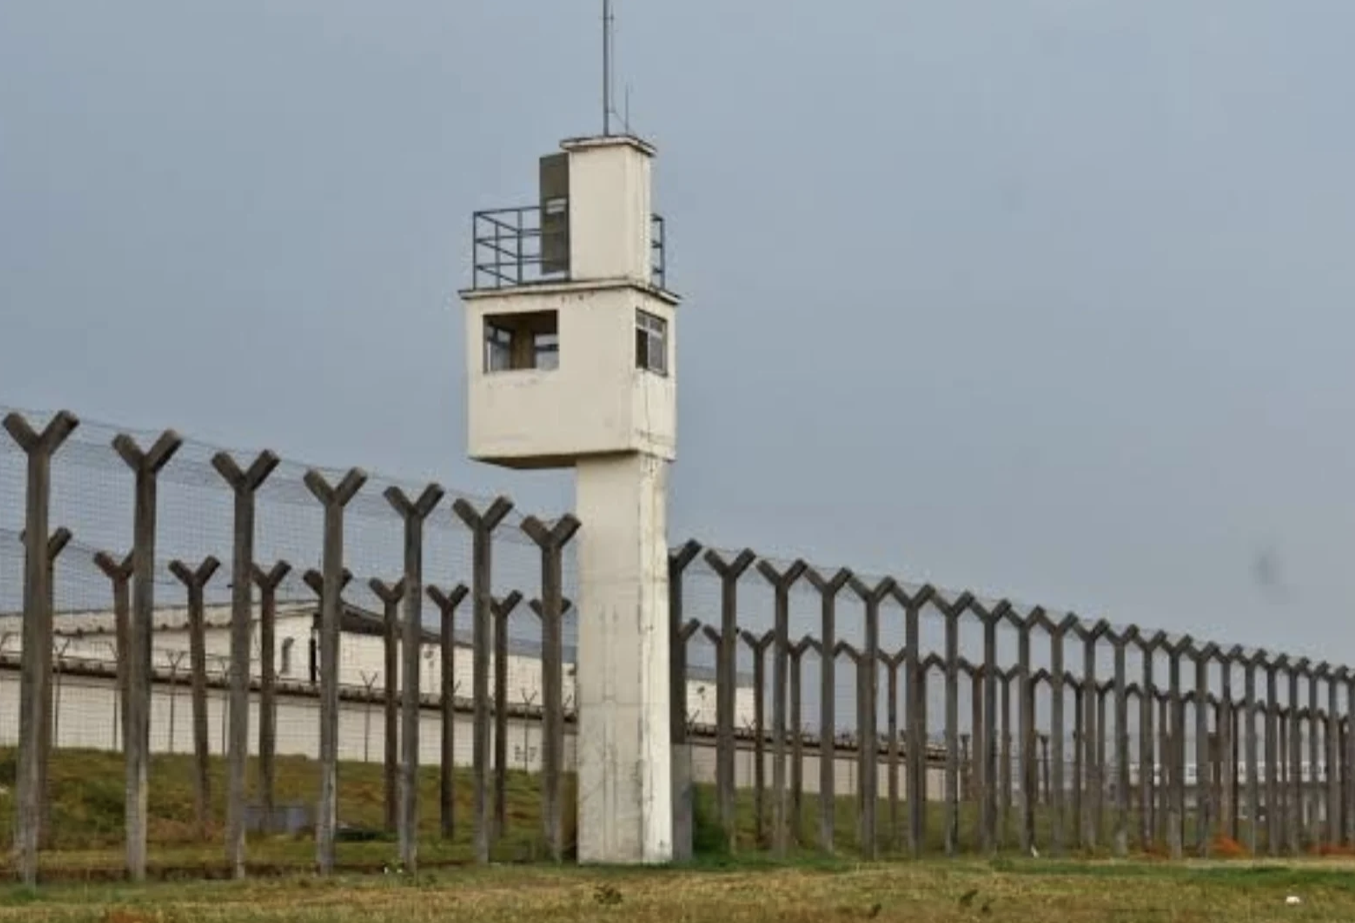 BRAZIL: Regime Planning To Deny Conservative Senators And Representatives Their Seats – 1000 “Lulag” Concentration Camp Inmates Forced To Get The Vax